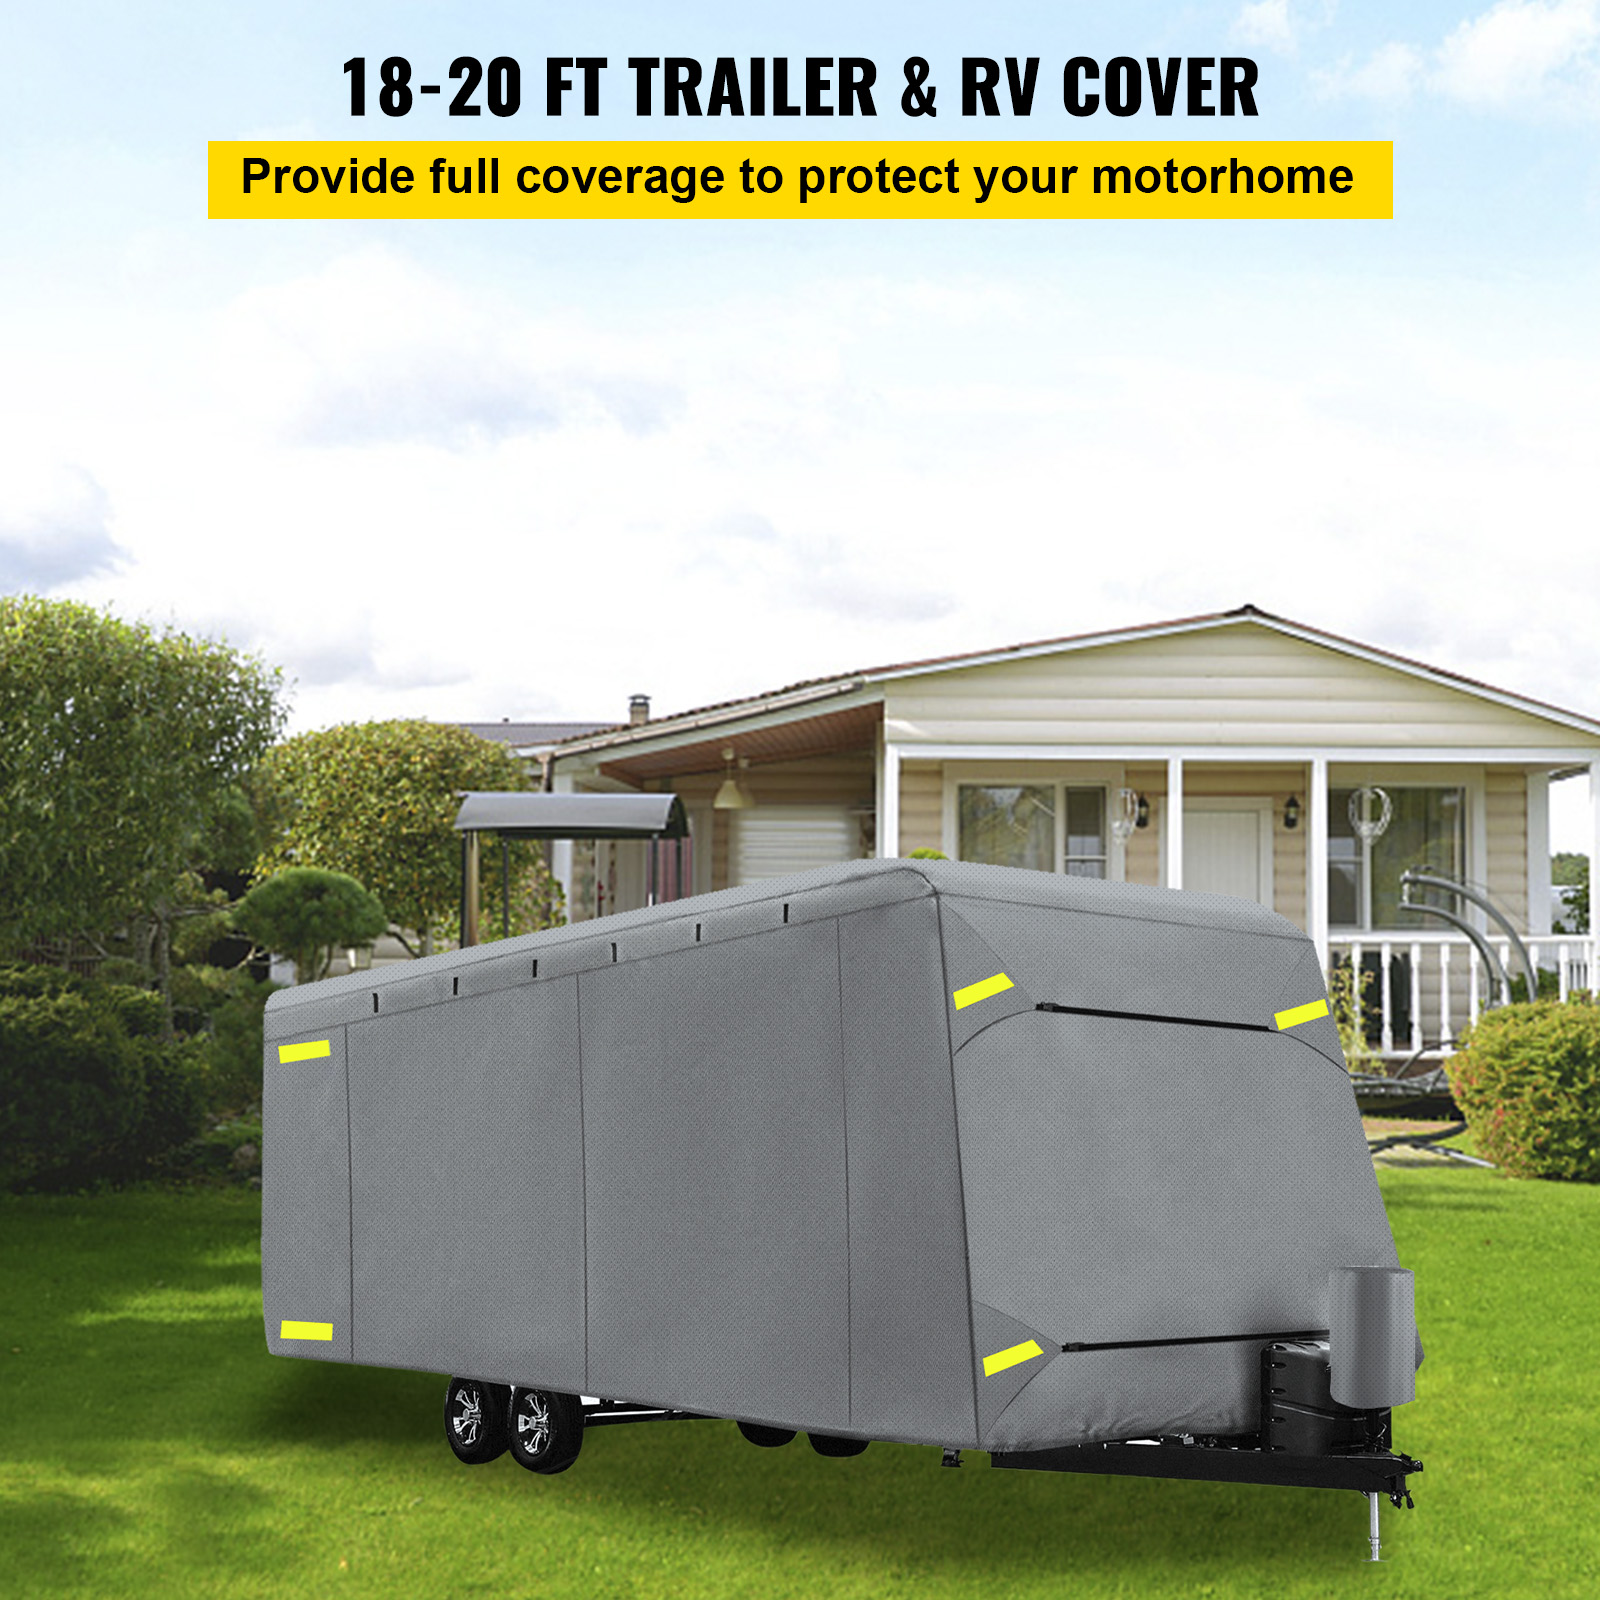 VEVOR RV Cover 18'-20' and Extra-Thick 4 Layers Travel Trailer RV Cover Durable Camper Cover, Waterproof Breathable Anti-UV Ripstop for RV Motorhome with Storage Bag - image 2 of 9